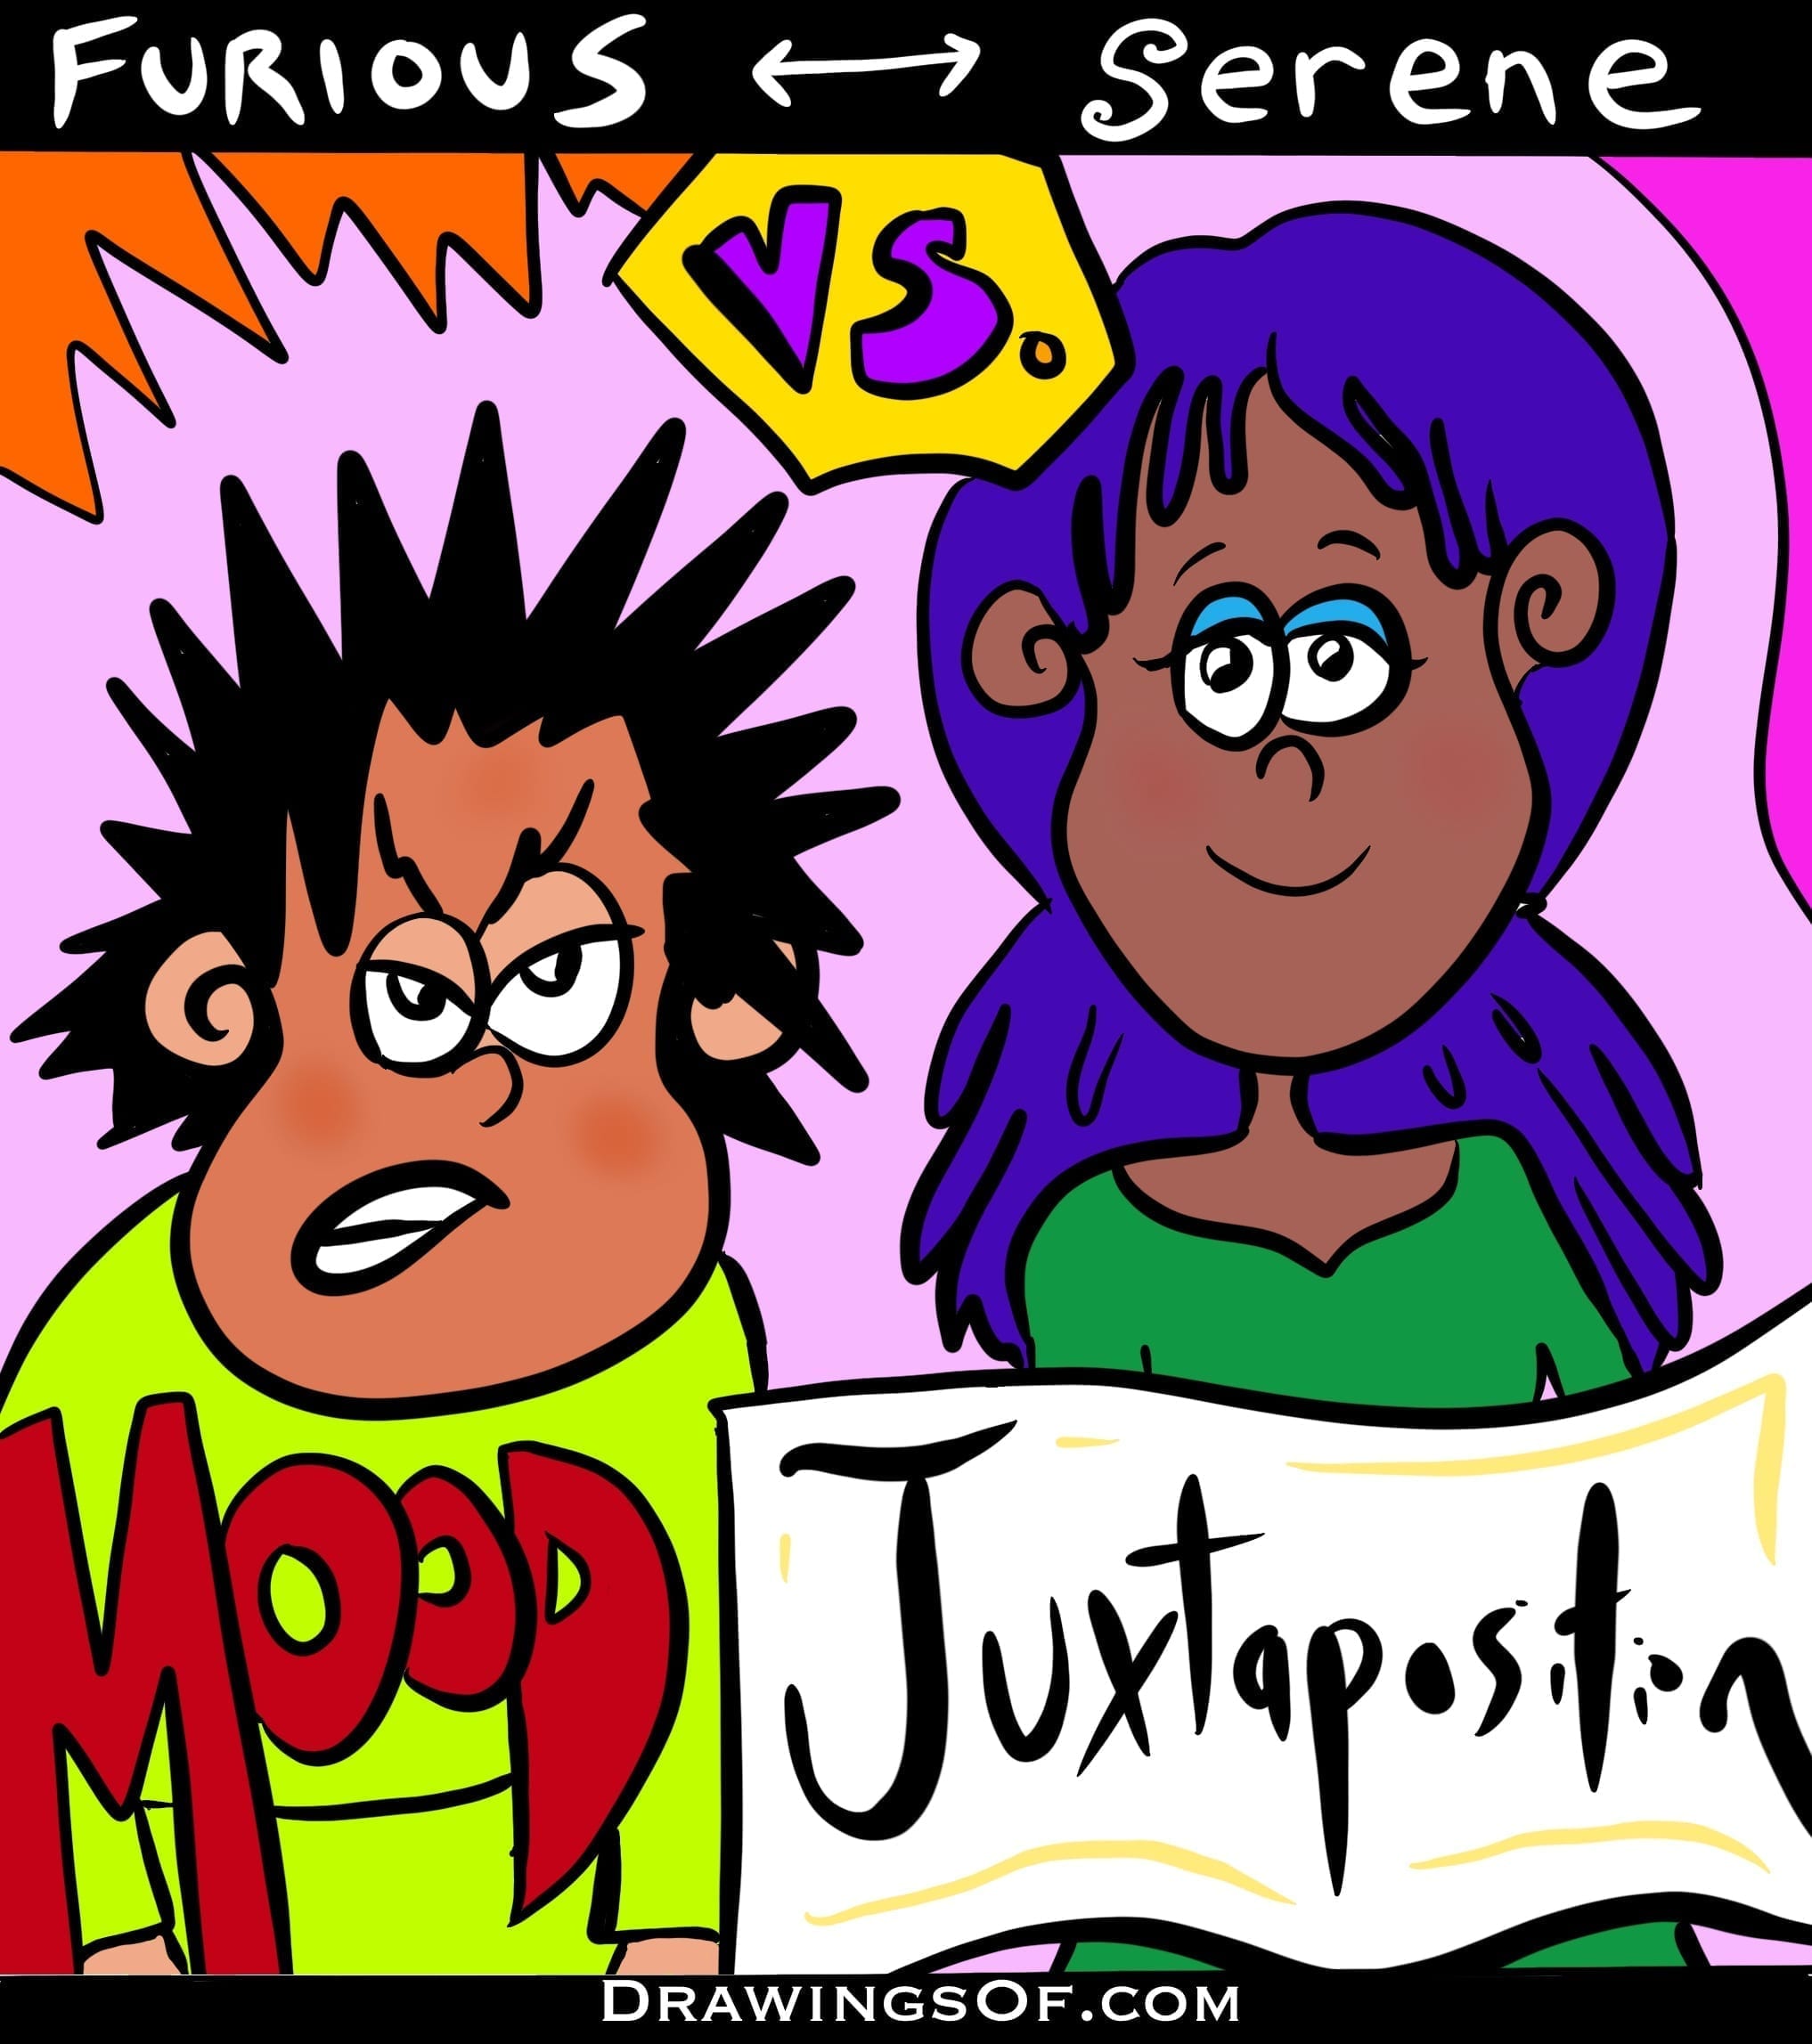 Juxtaposition sentences and examples in cartoon art: different moods